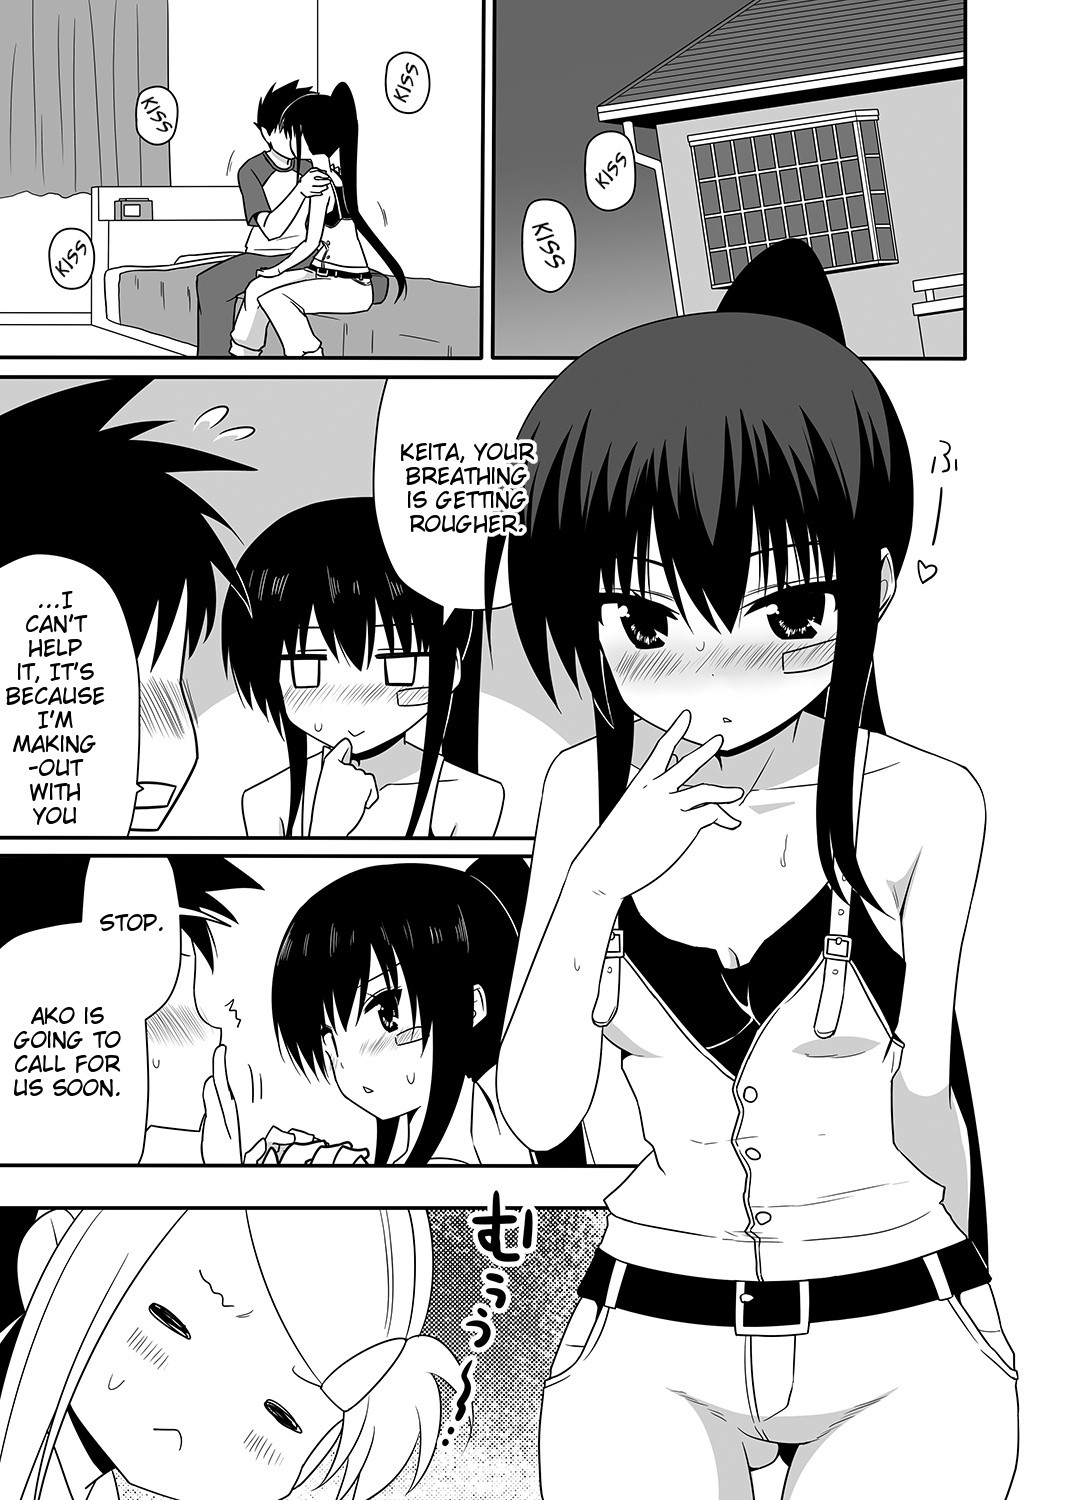 The day I went over the line with Ako-nee hentai manga picture 2